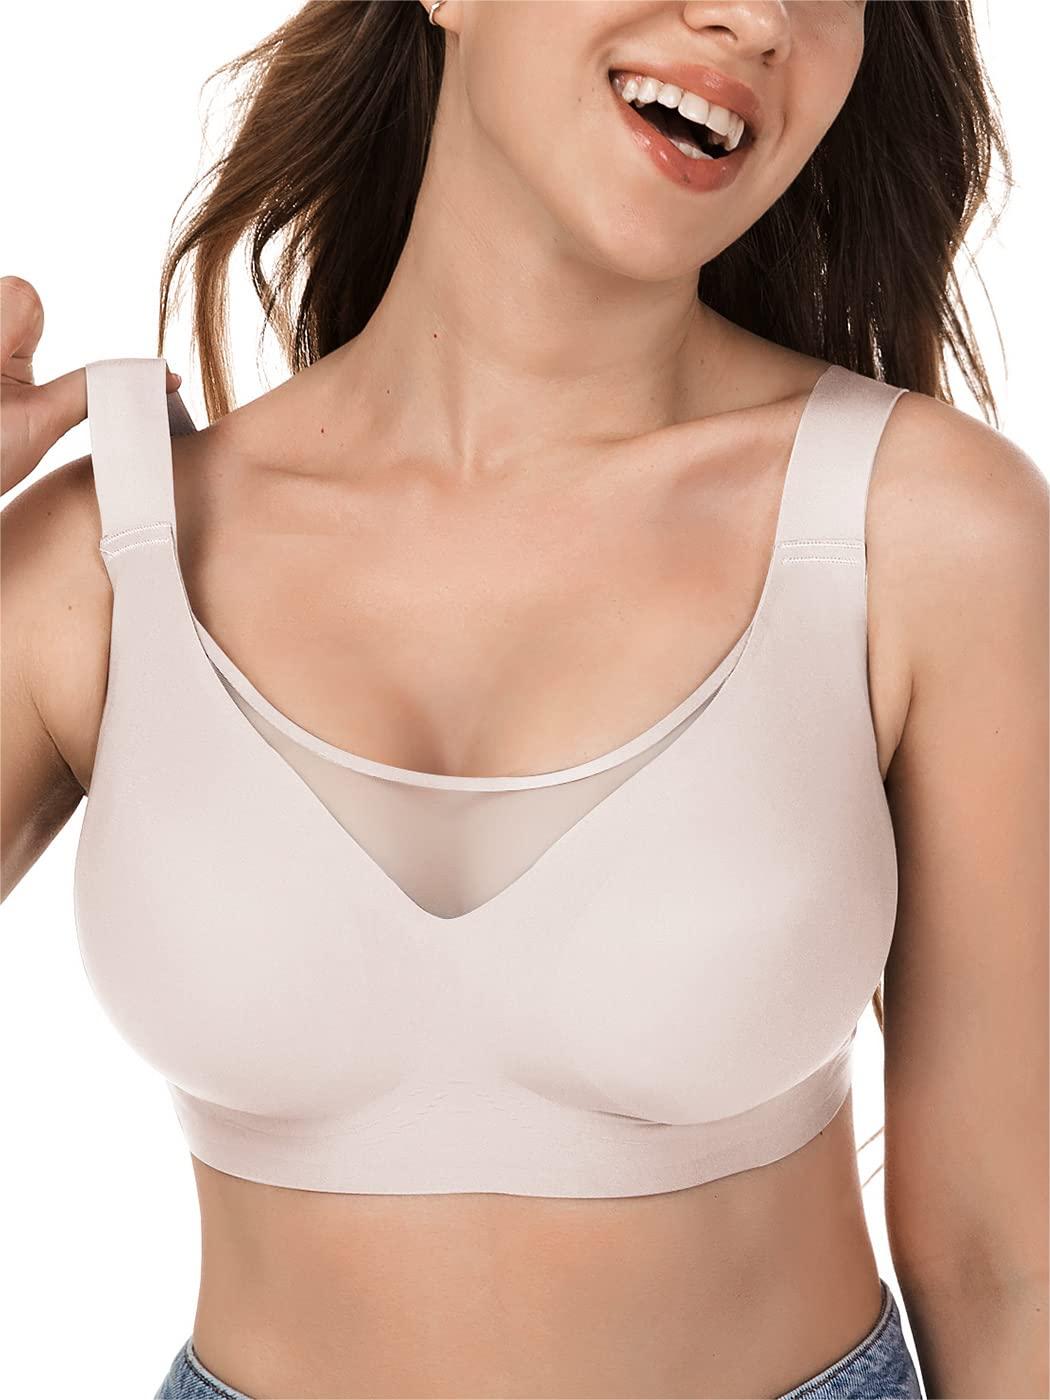 How Can Seamless Wire-Free Big Bras Improve Saggy Breasts